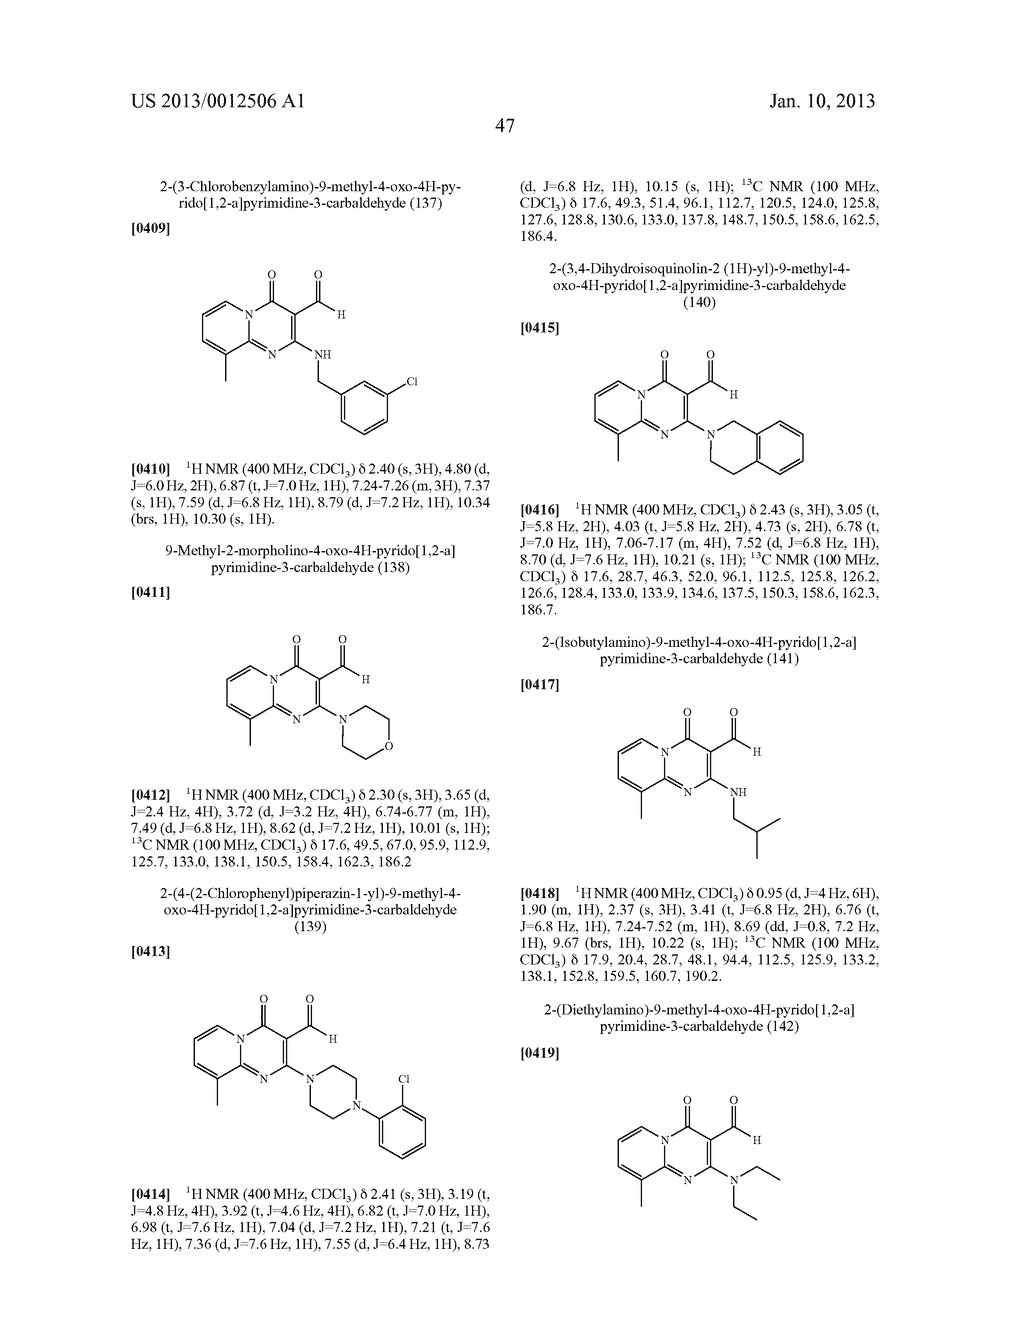 ANTI-INFECTIVE PYRIDO (1,2-A) PYRIMIDINES - diagram, schematic, and image 58